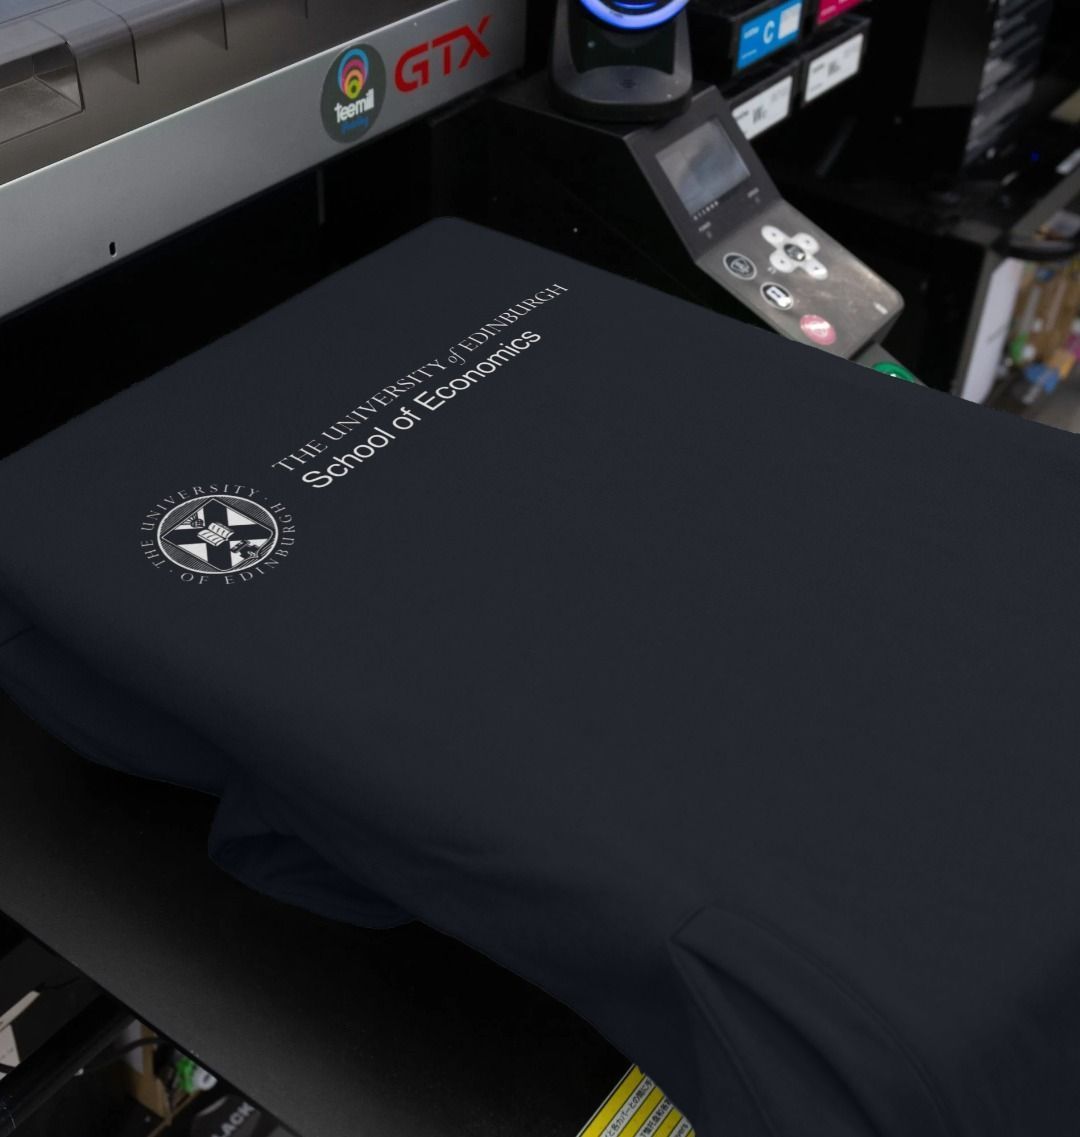 Our School of Economics Hoodie being printed by our print on demand partner, teemill.